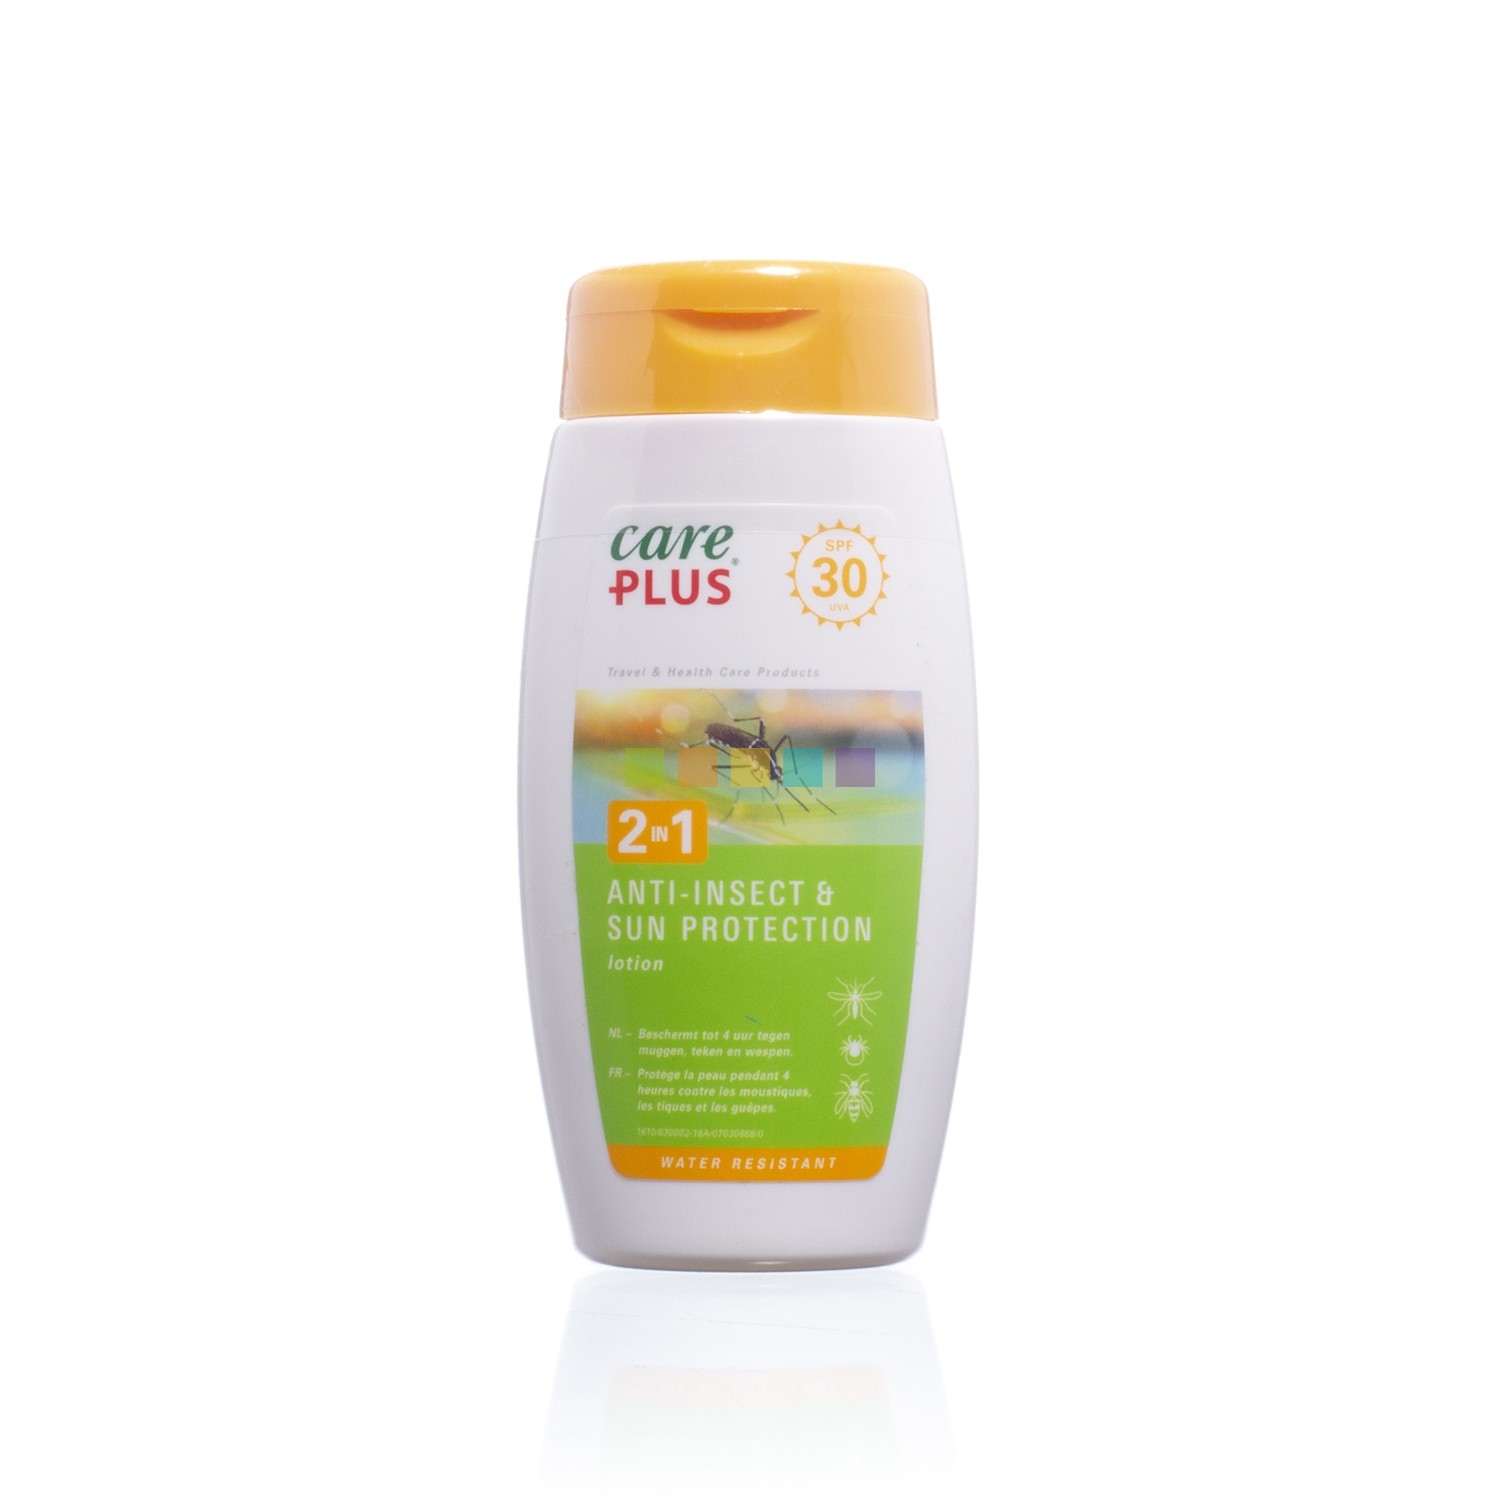 Care Plus 2in1 Anti-Insect & Sun Protection Lotion SPF30 - Anti-insectes